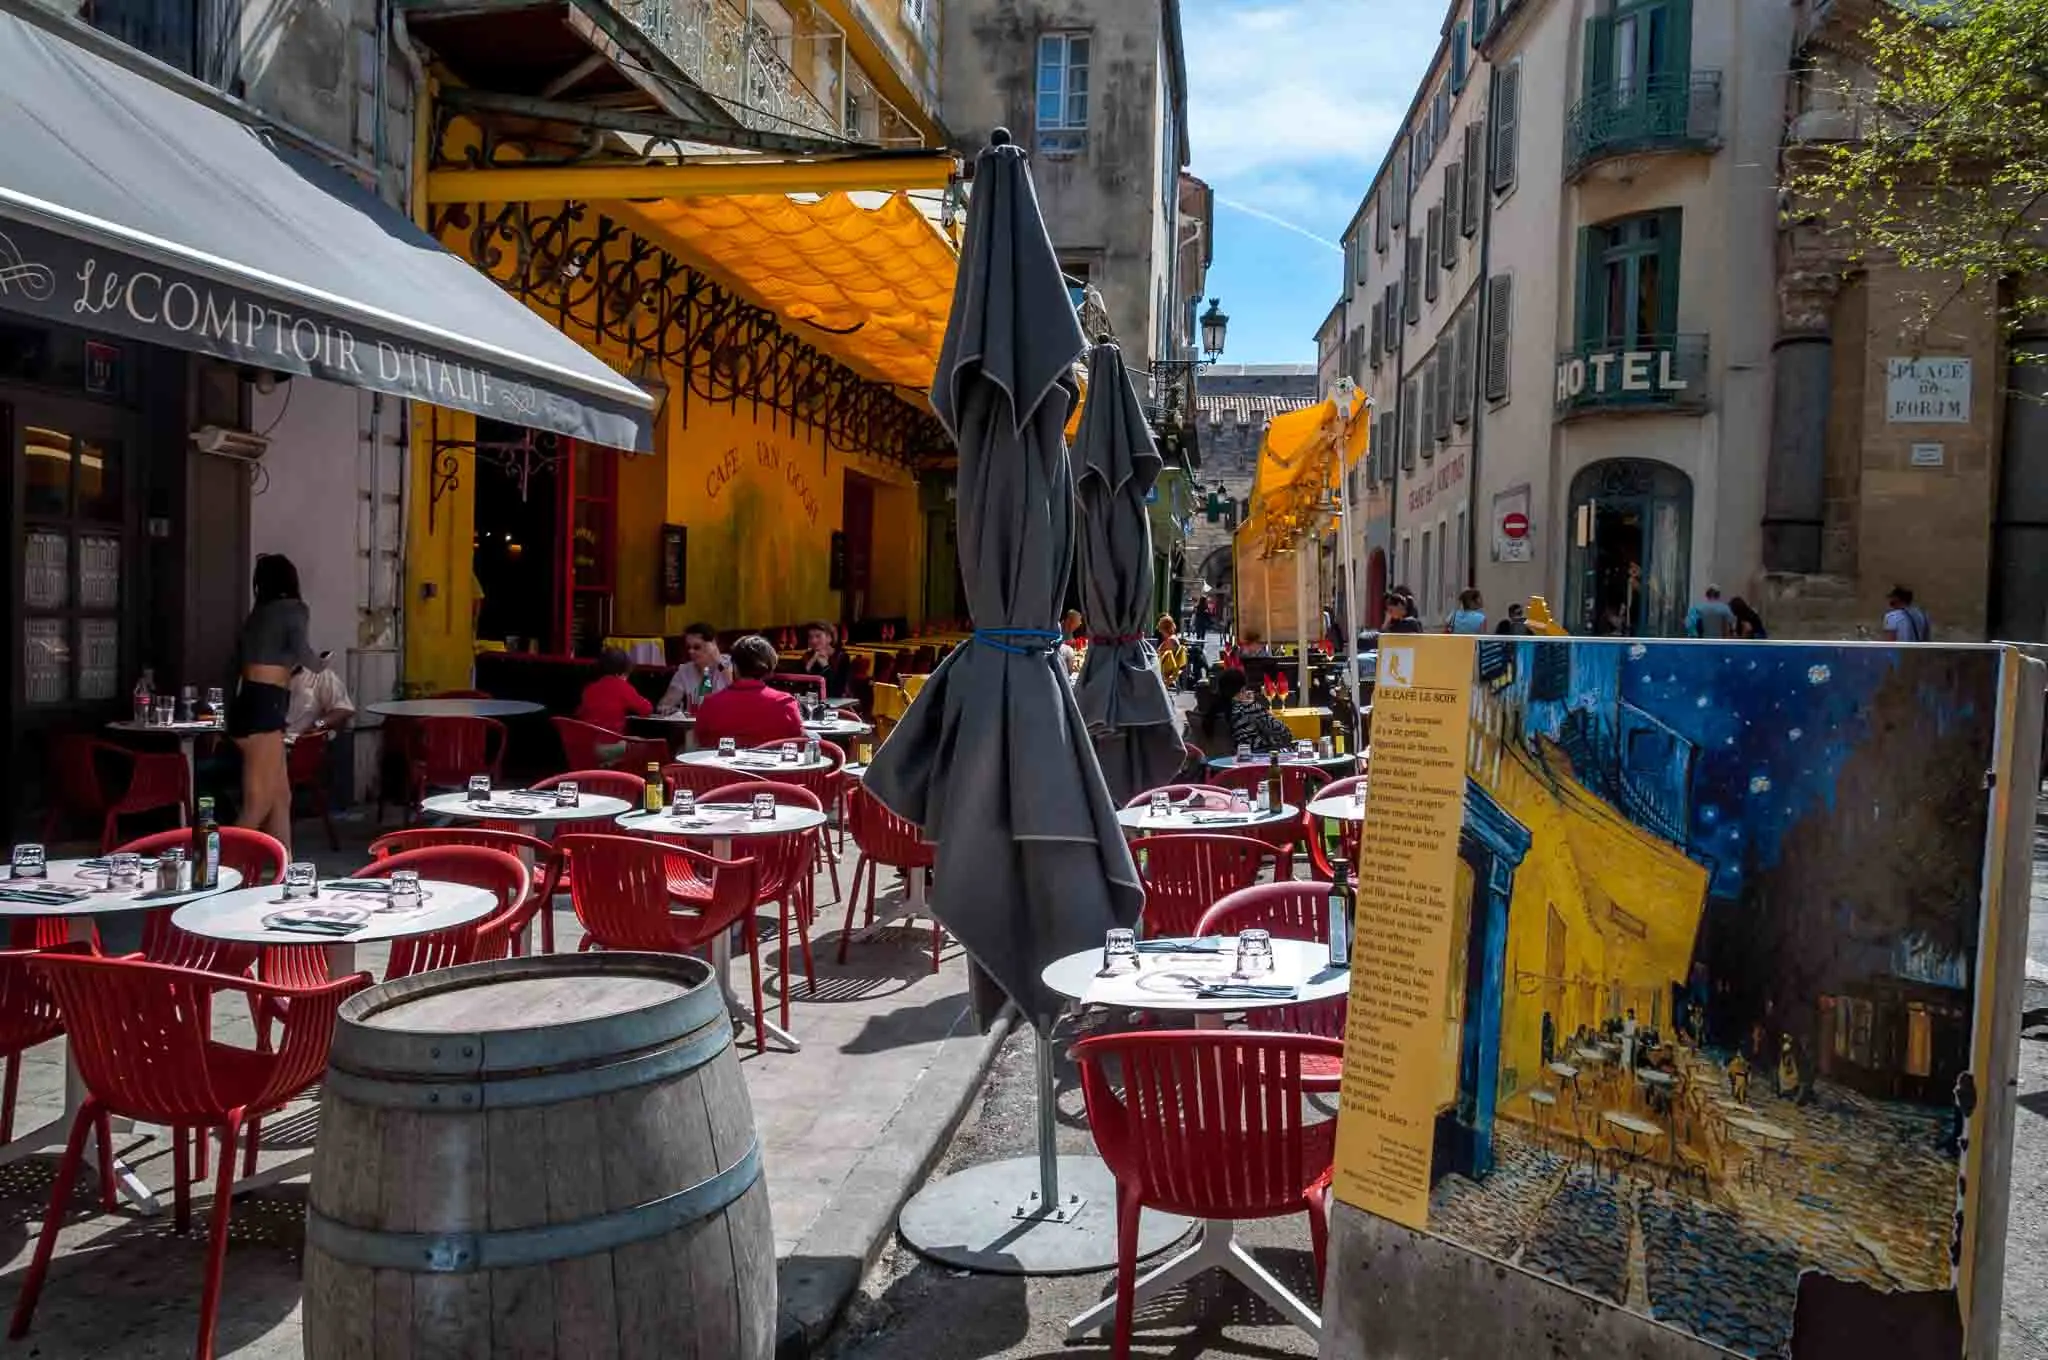 Sidewalk cafe alongside a painting of the site